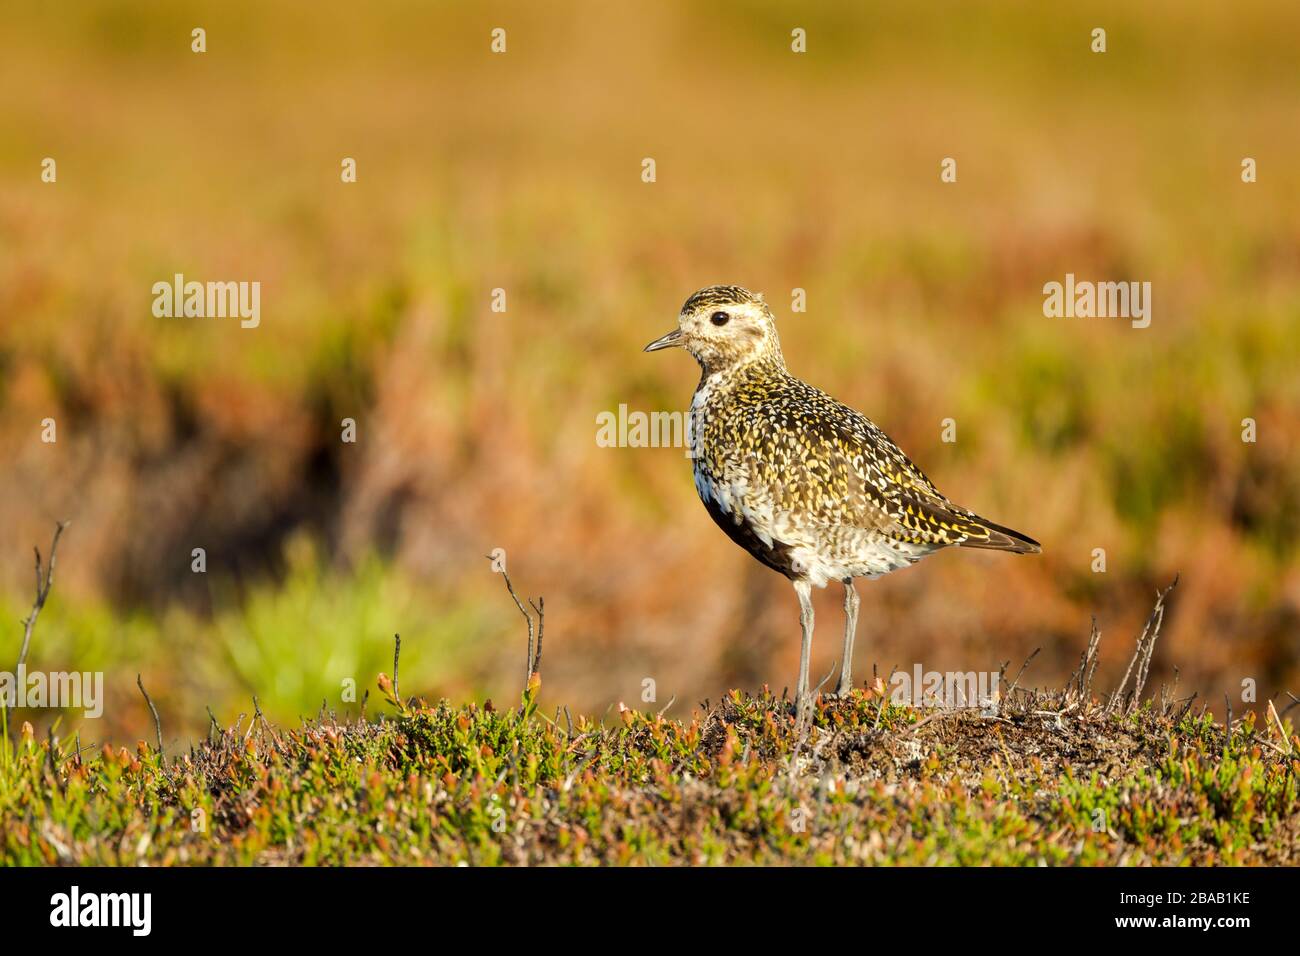 Golden Plover female (Pluvialis apricaria) standing on moorland vegetation in warm light Stock Photo